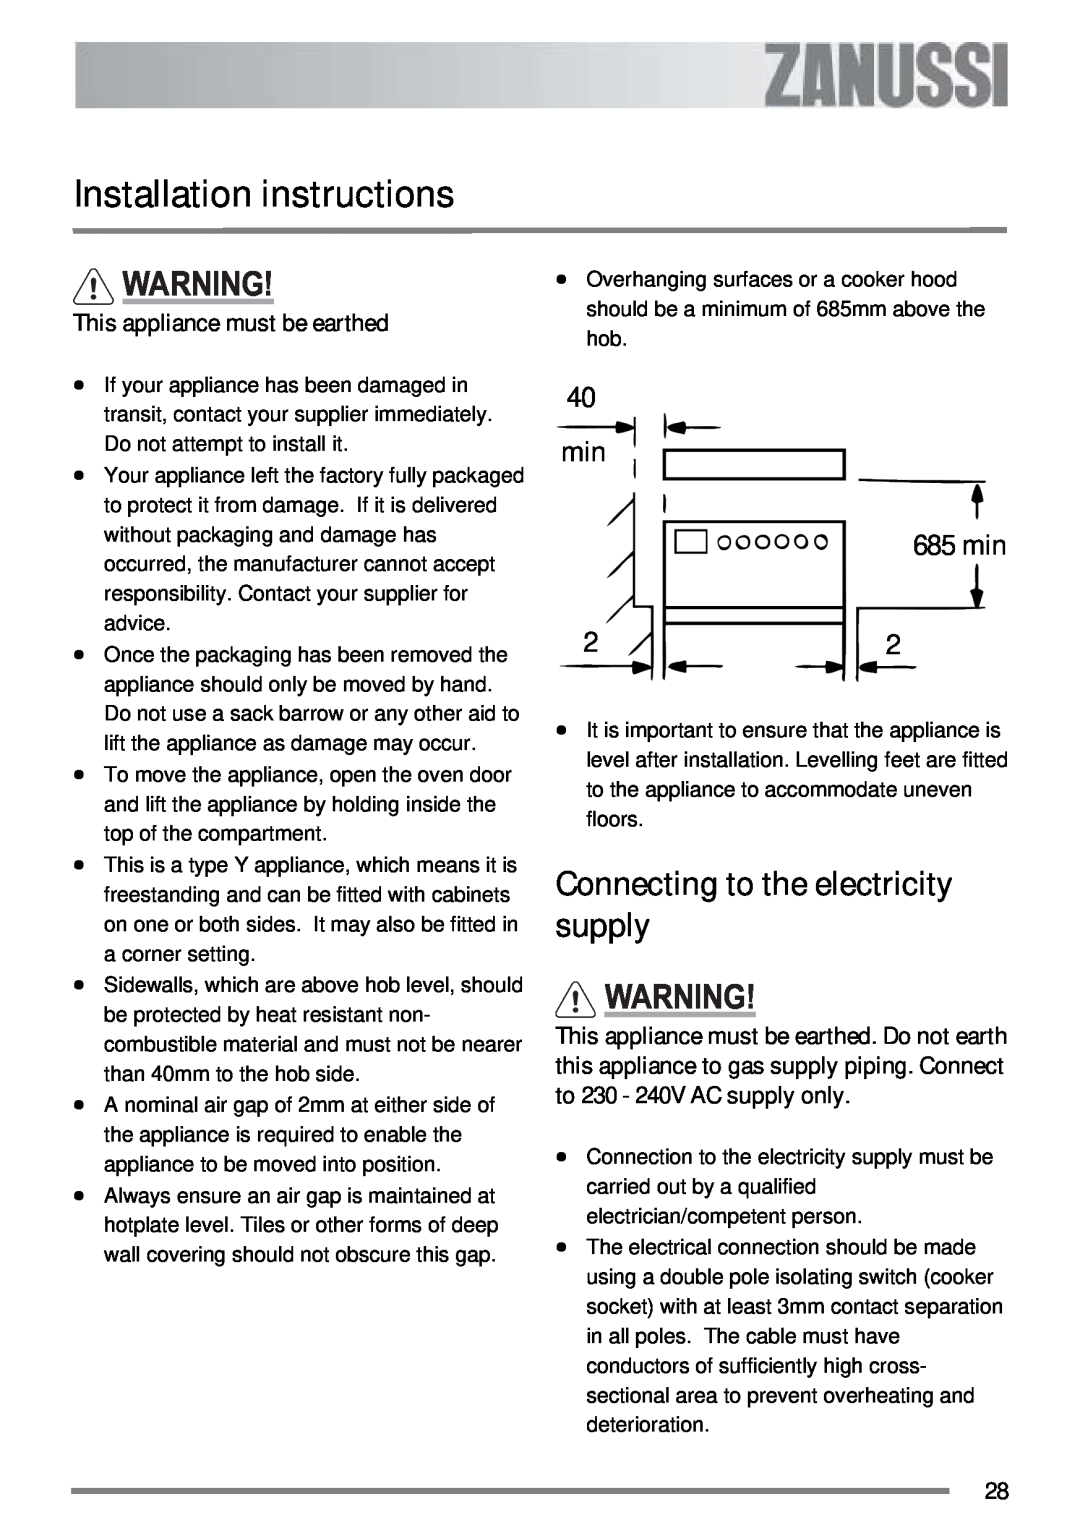 Zanussi ZKC 6000W user manual Installation instructions, Connecting to the electricity supply, min 685 min 